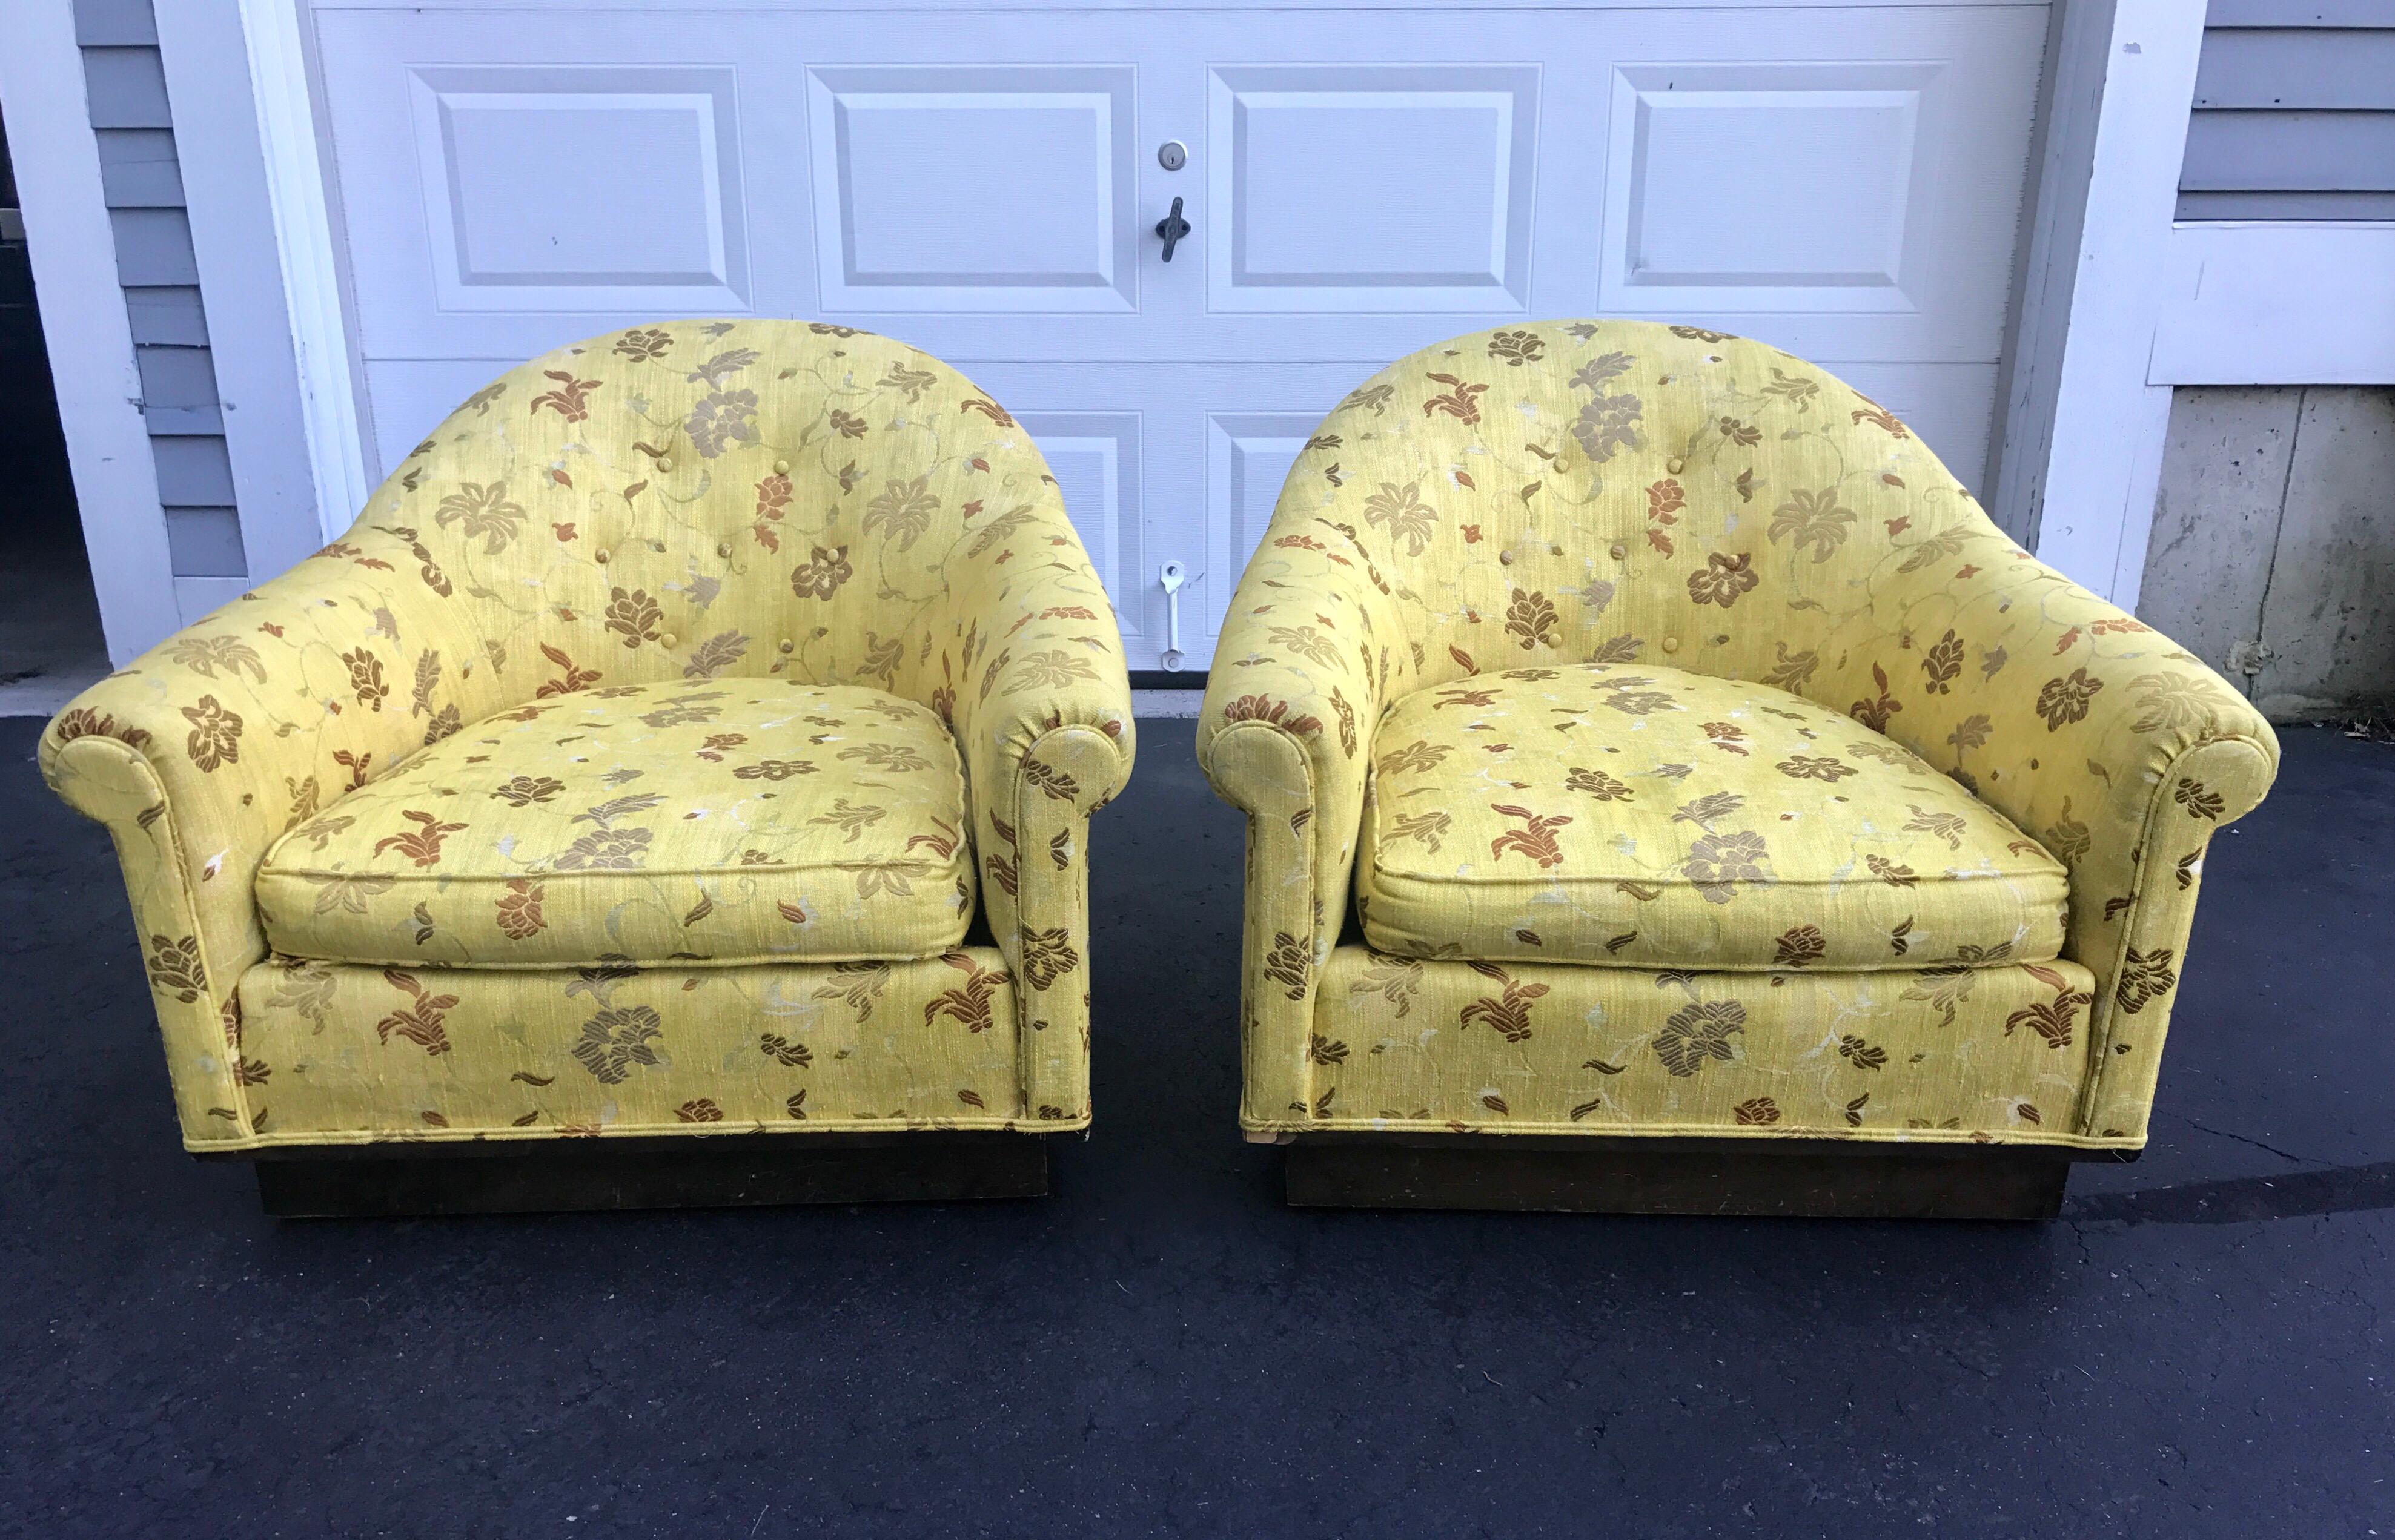 Gorgeous pair of matching Milo Baughman style barrel chairs on casters with newer Scalamandre upholstery which is magnificent.